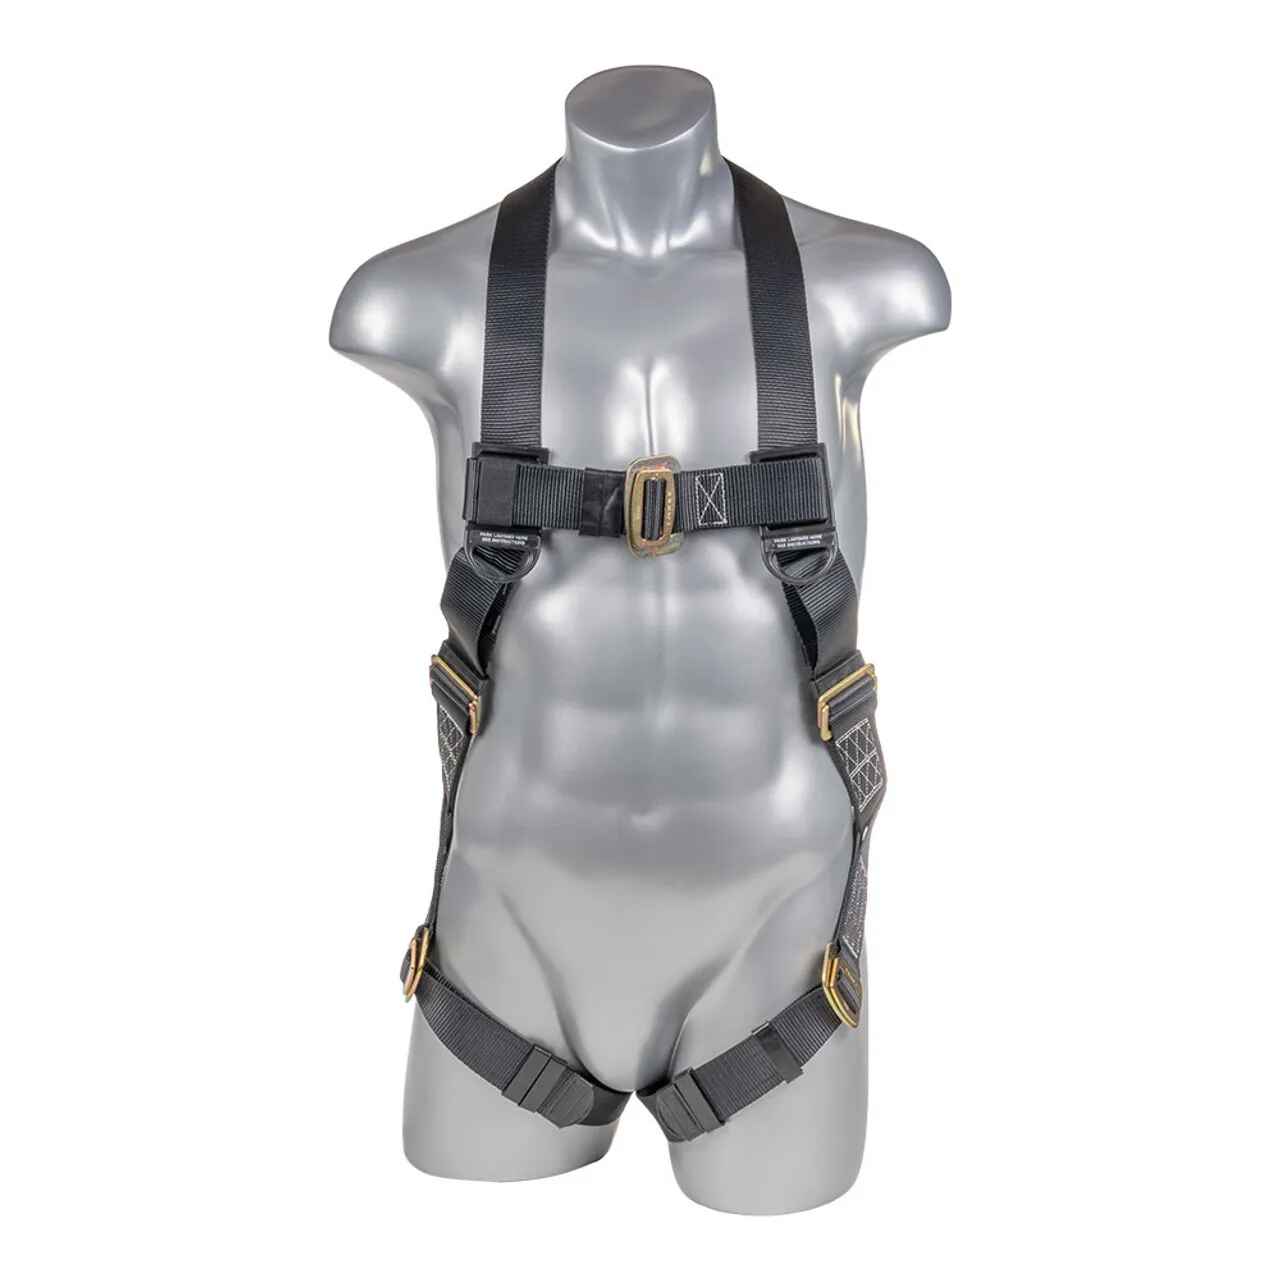 Full Protection 5pt. Body Harness and Lanyard Combo - Defender Safety